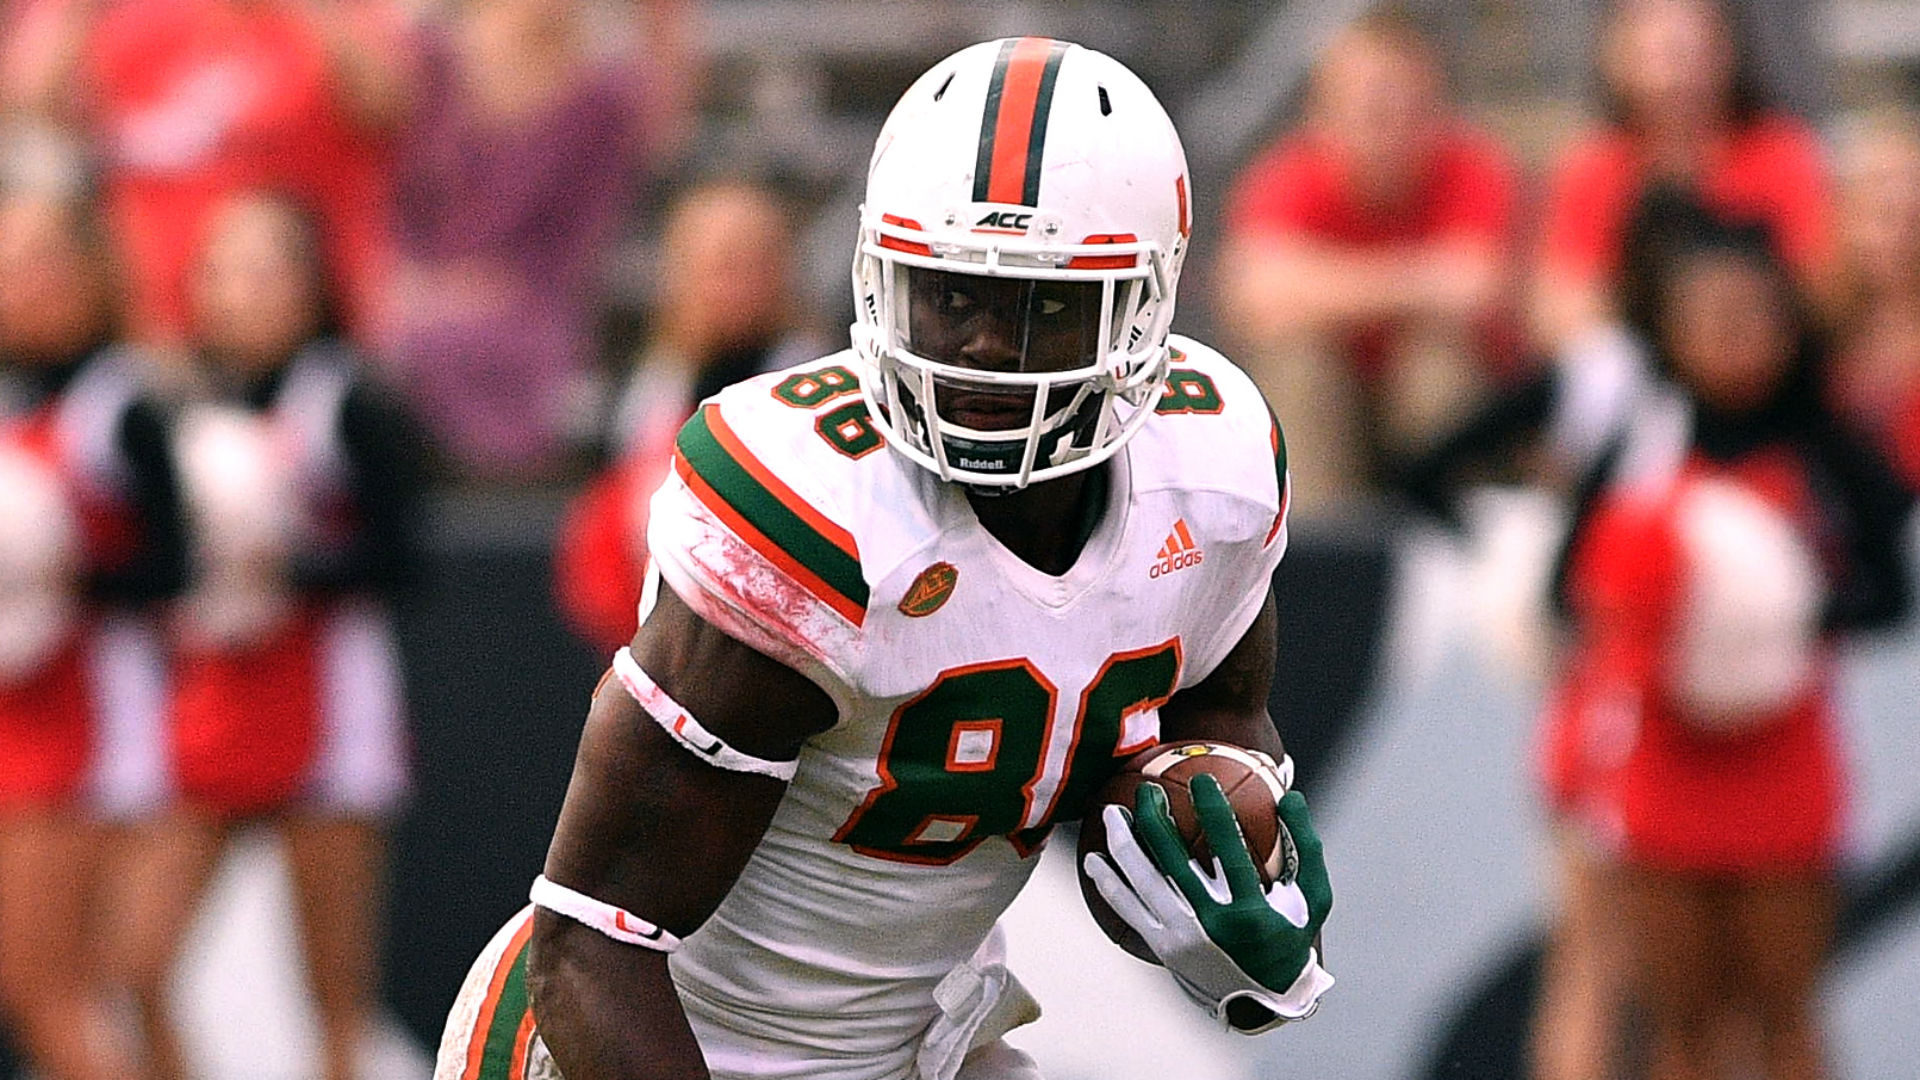 Meet David Njoku, the tight end worth drafting in the first round in